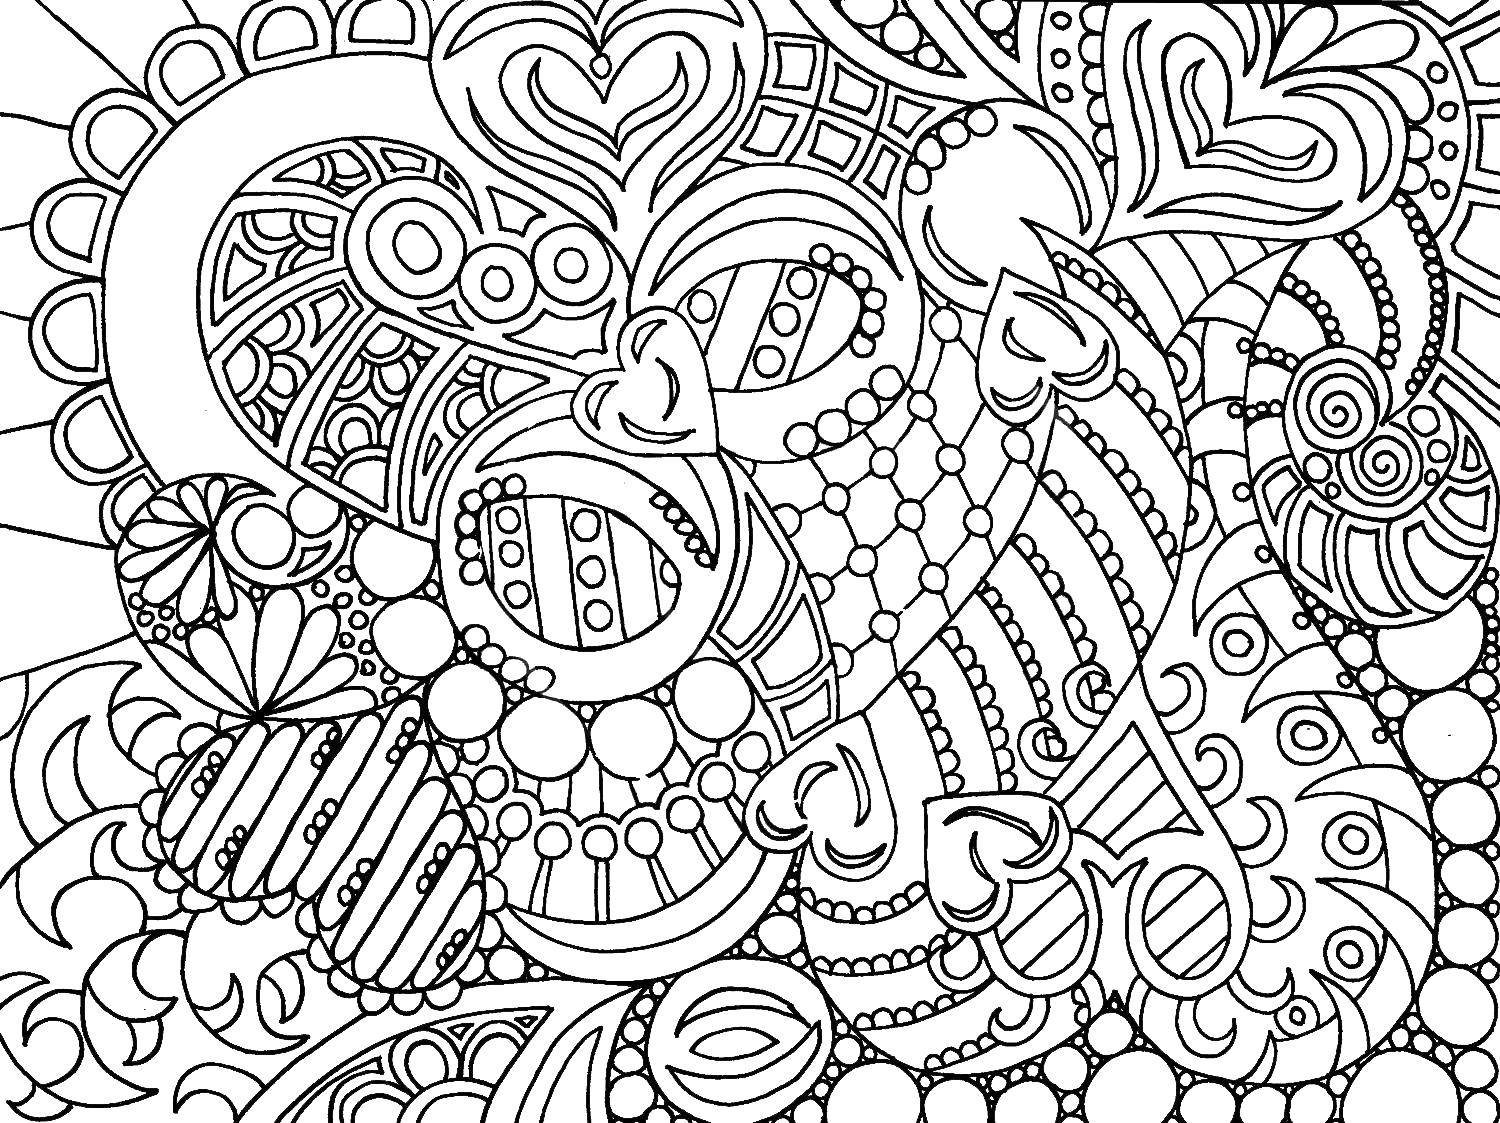 Coloring A pattern of many hearts. Category patterns. Tags:  Patterns, hearts.